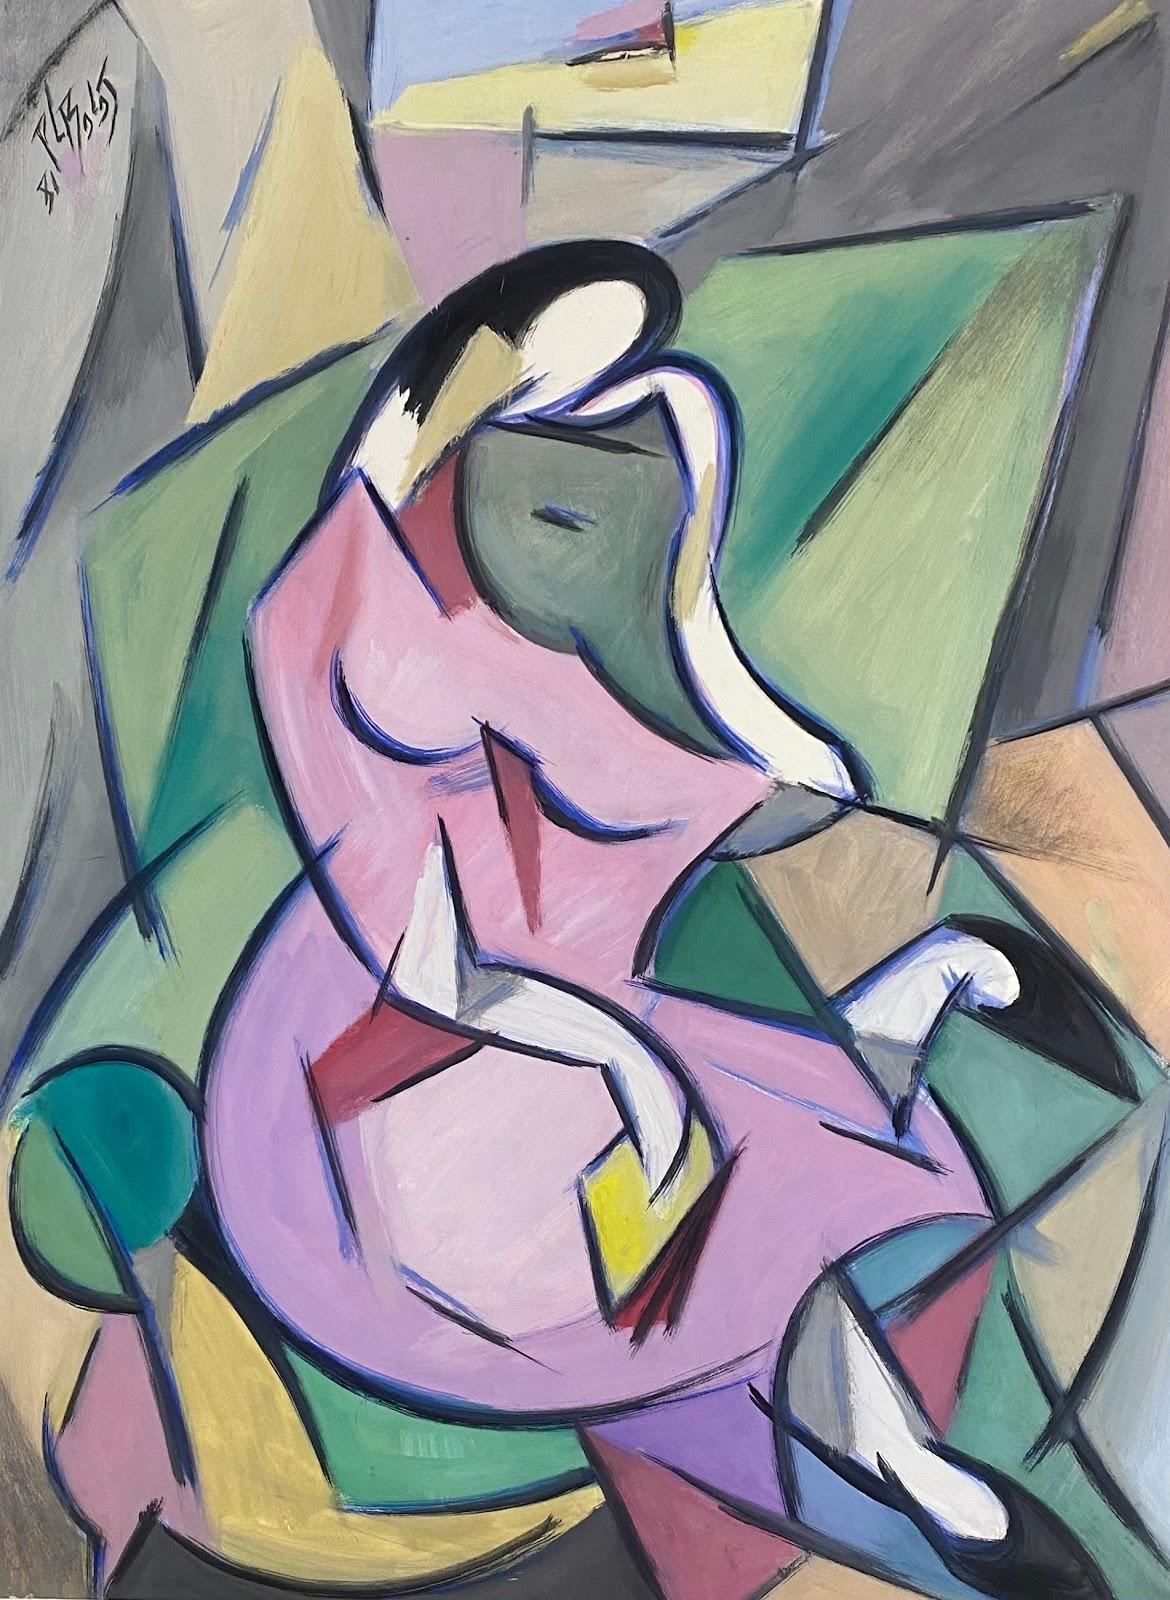 Paul-Louis Bolot (French 1918-2003) Figurative Painting - 20th Century French Modernist Painting Cubist Geometric Purple Portrait Of Lady